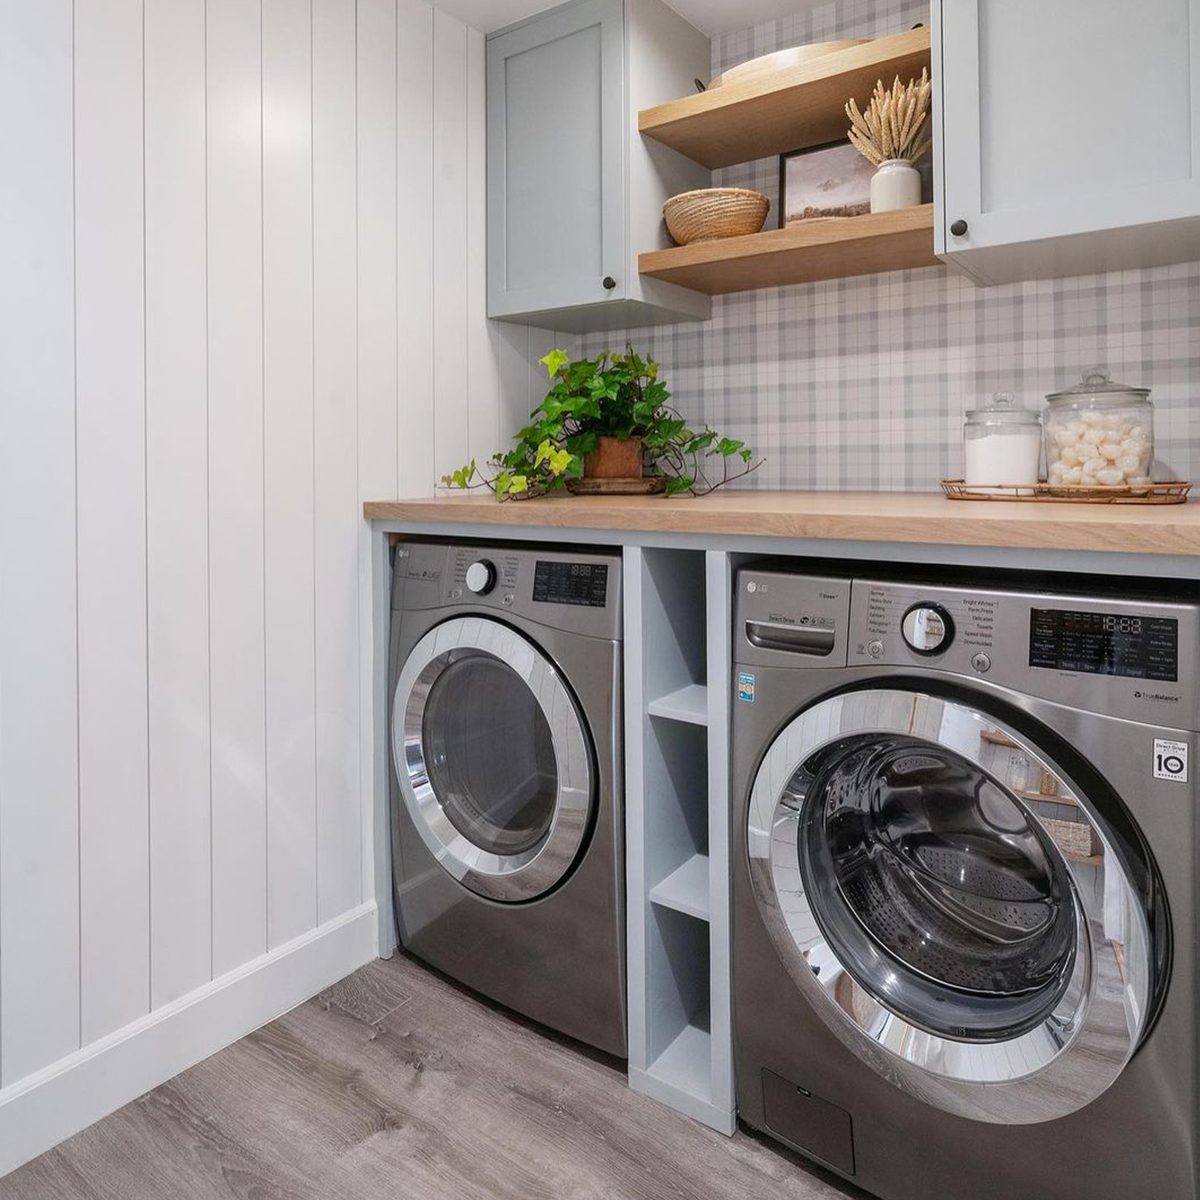 Modern Cottage Laundry Room Design Courtesy Onteallane Tracythetradie